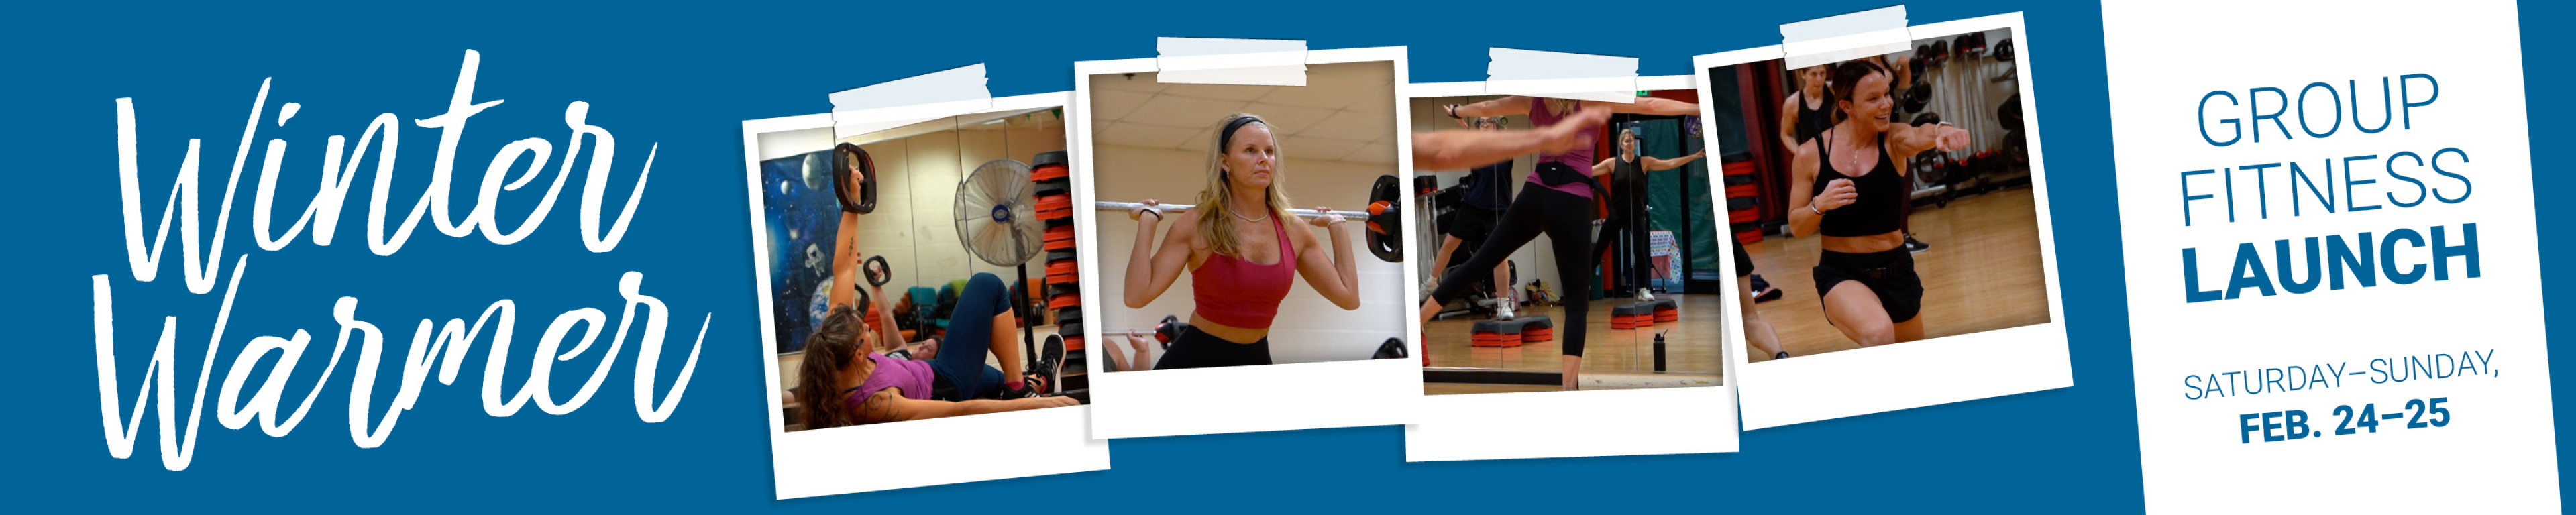 Winter Warmer • Group Fitness Launch at West Hills Athletic Club on Feb. 24 and 25